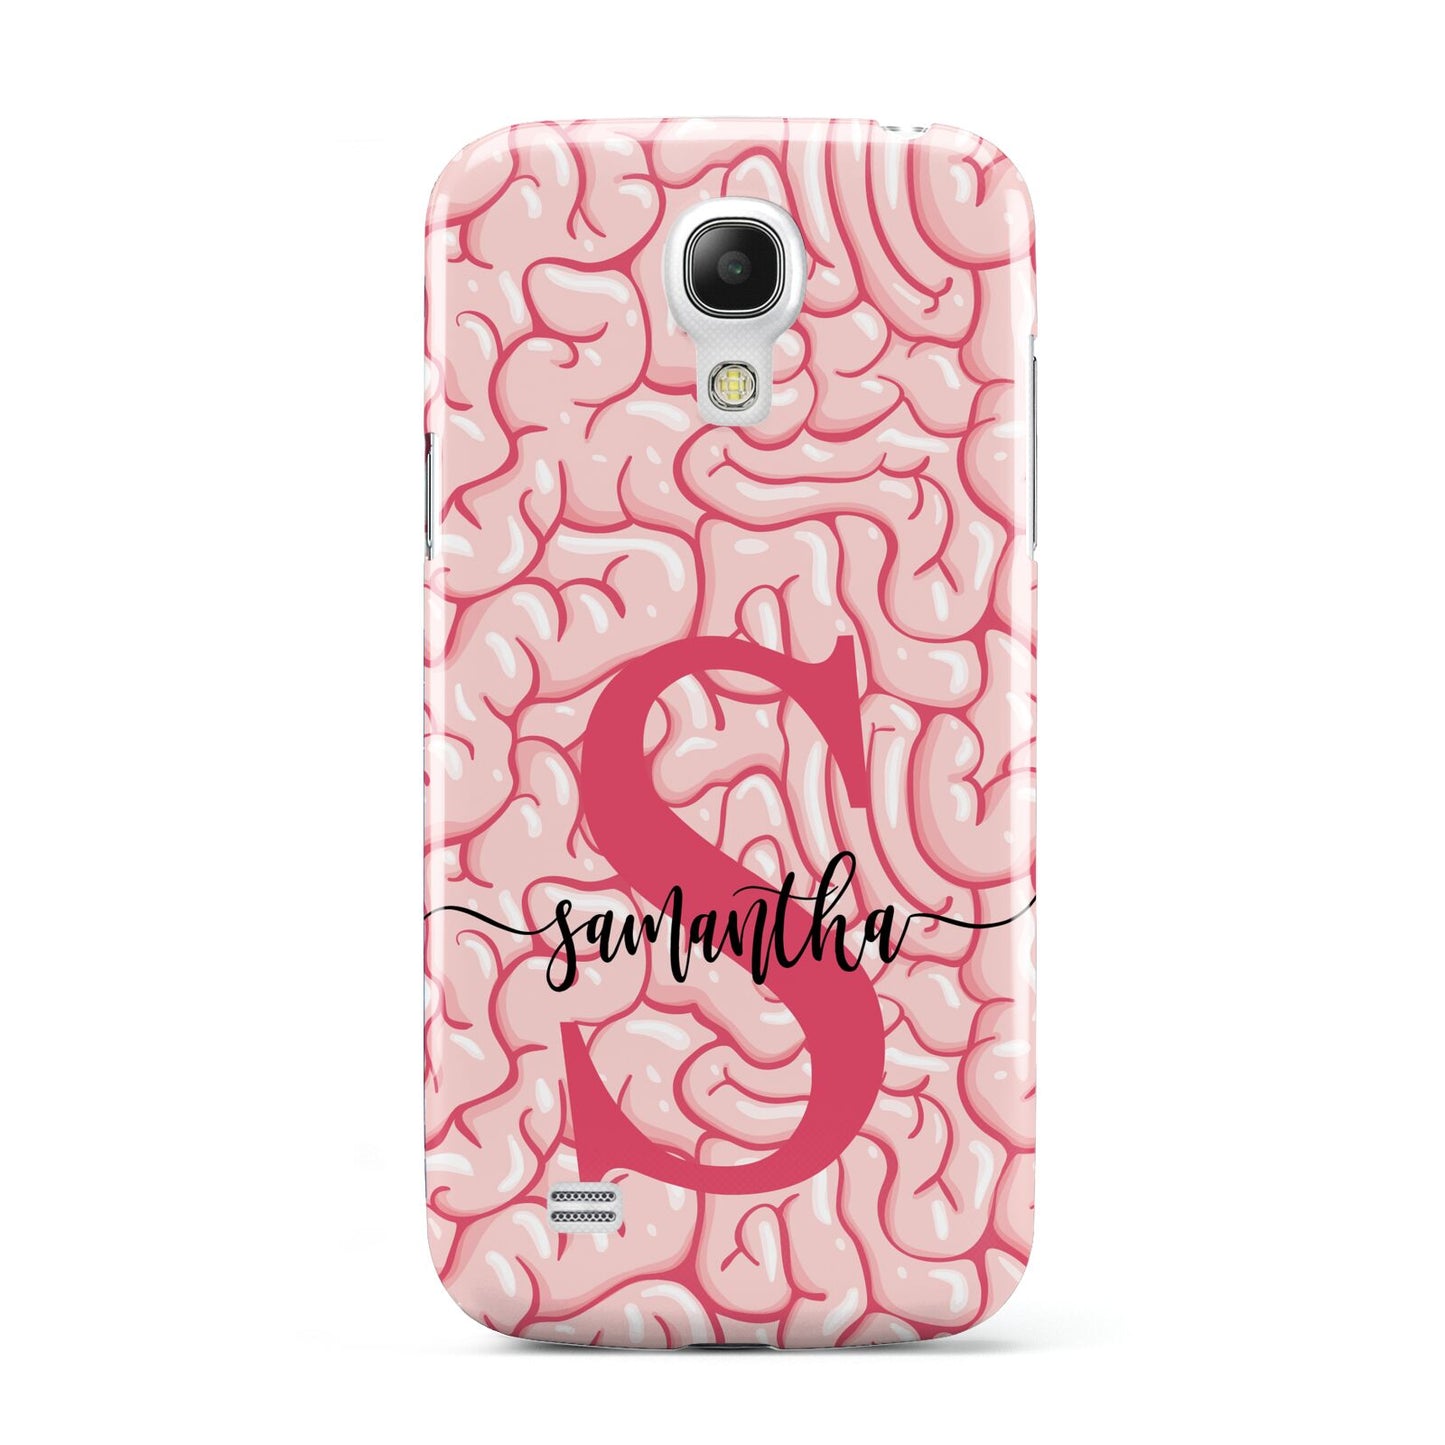 Brain Background with Monogram and Text Samsung Galaxy S4 Mini Case